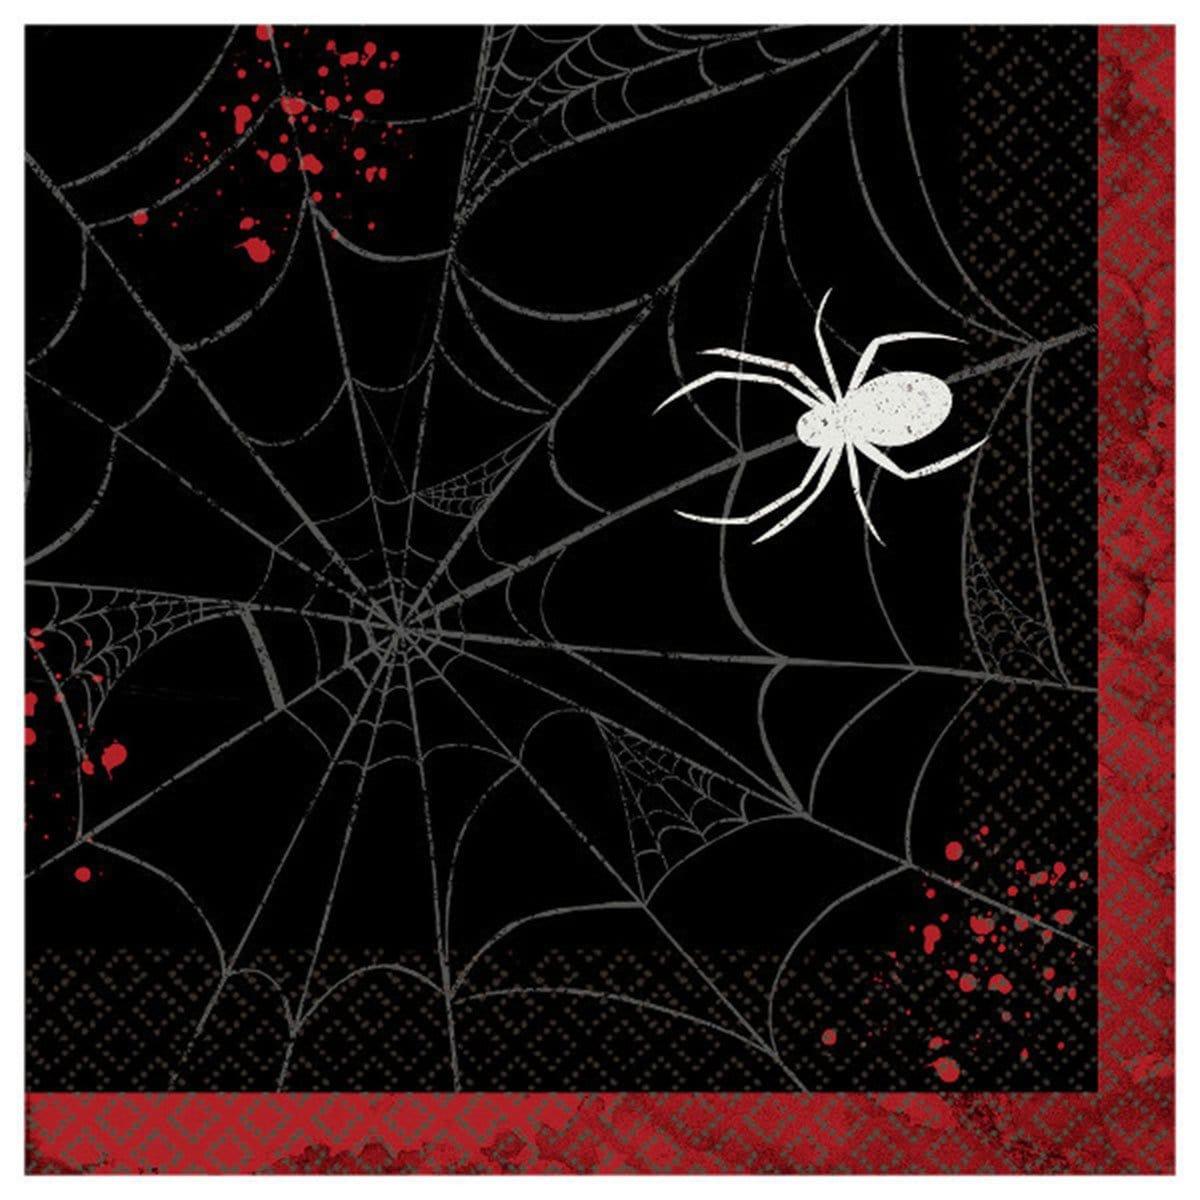 Buy Halloween Dark Manor lunch napkins, 16 per package sold at Party Expert